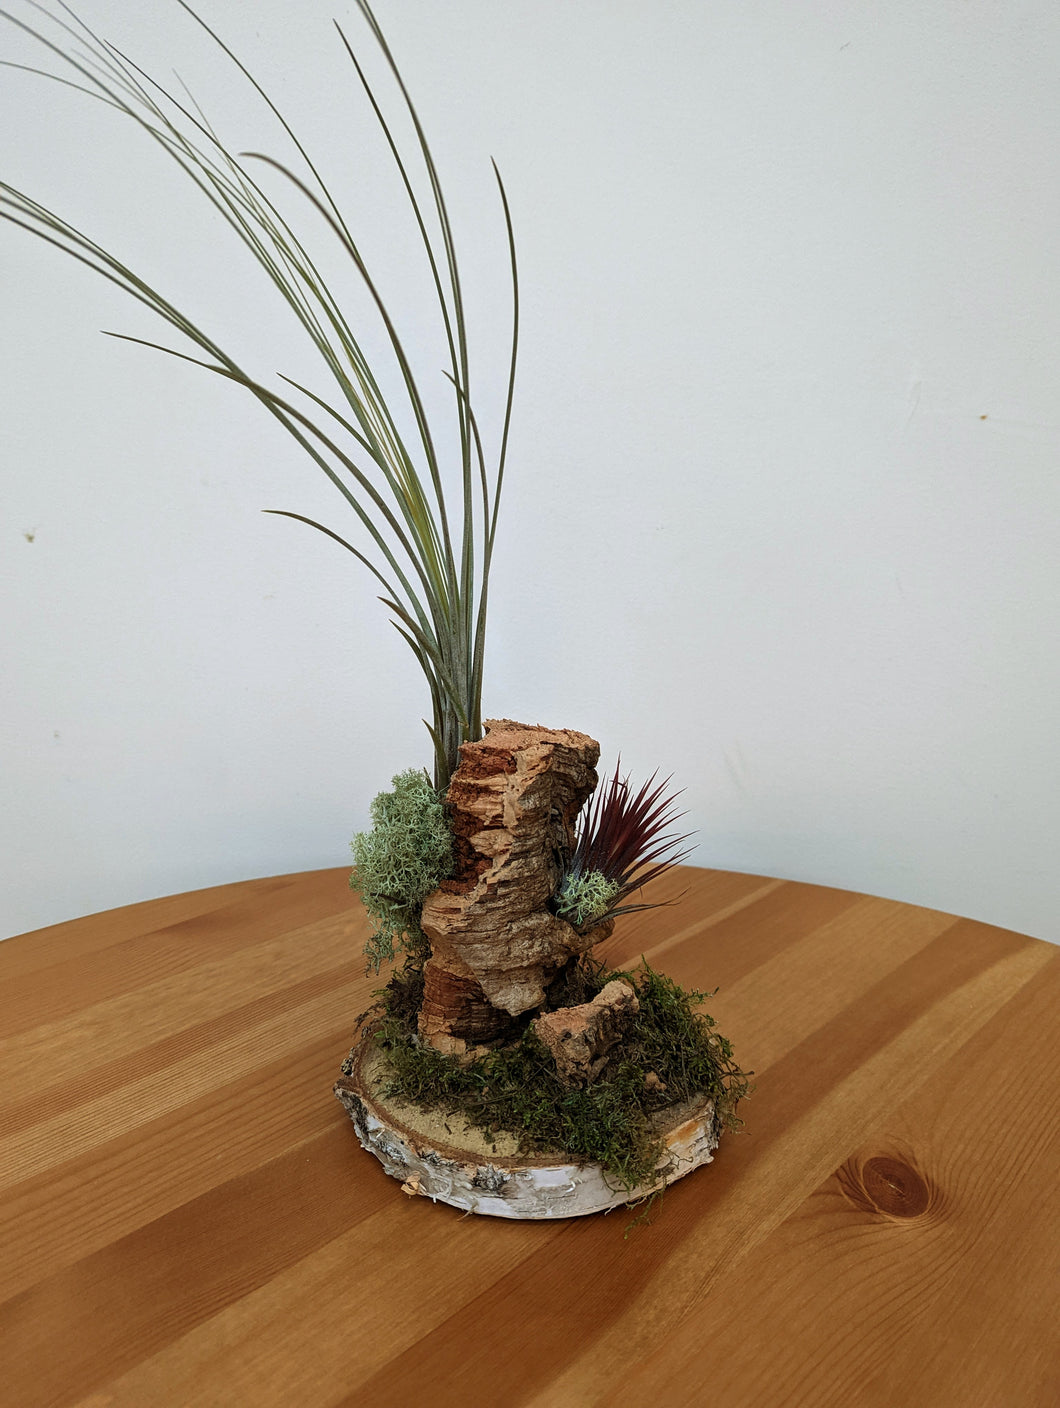 Mounted Airplant Arrangement